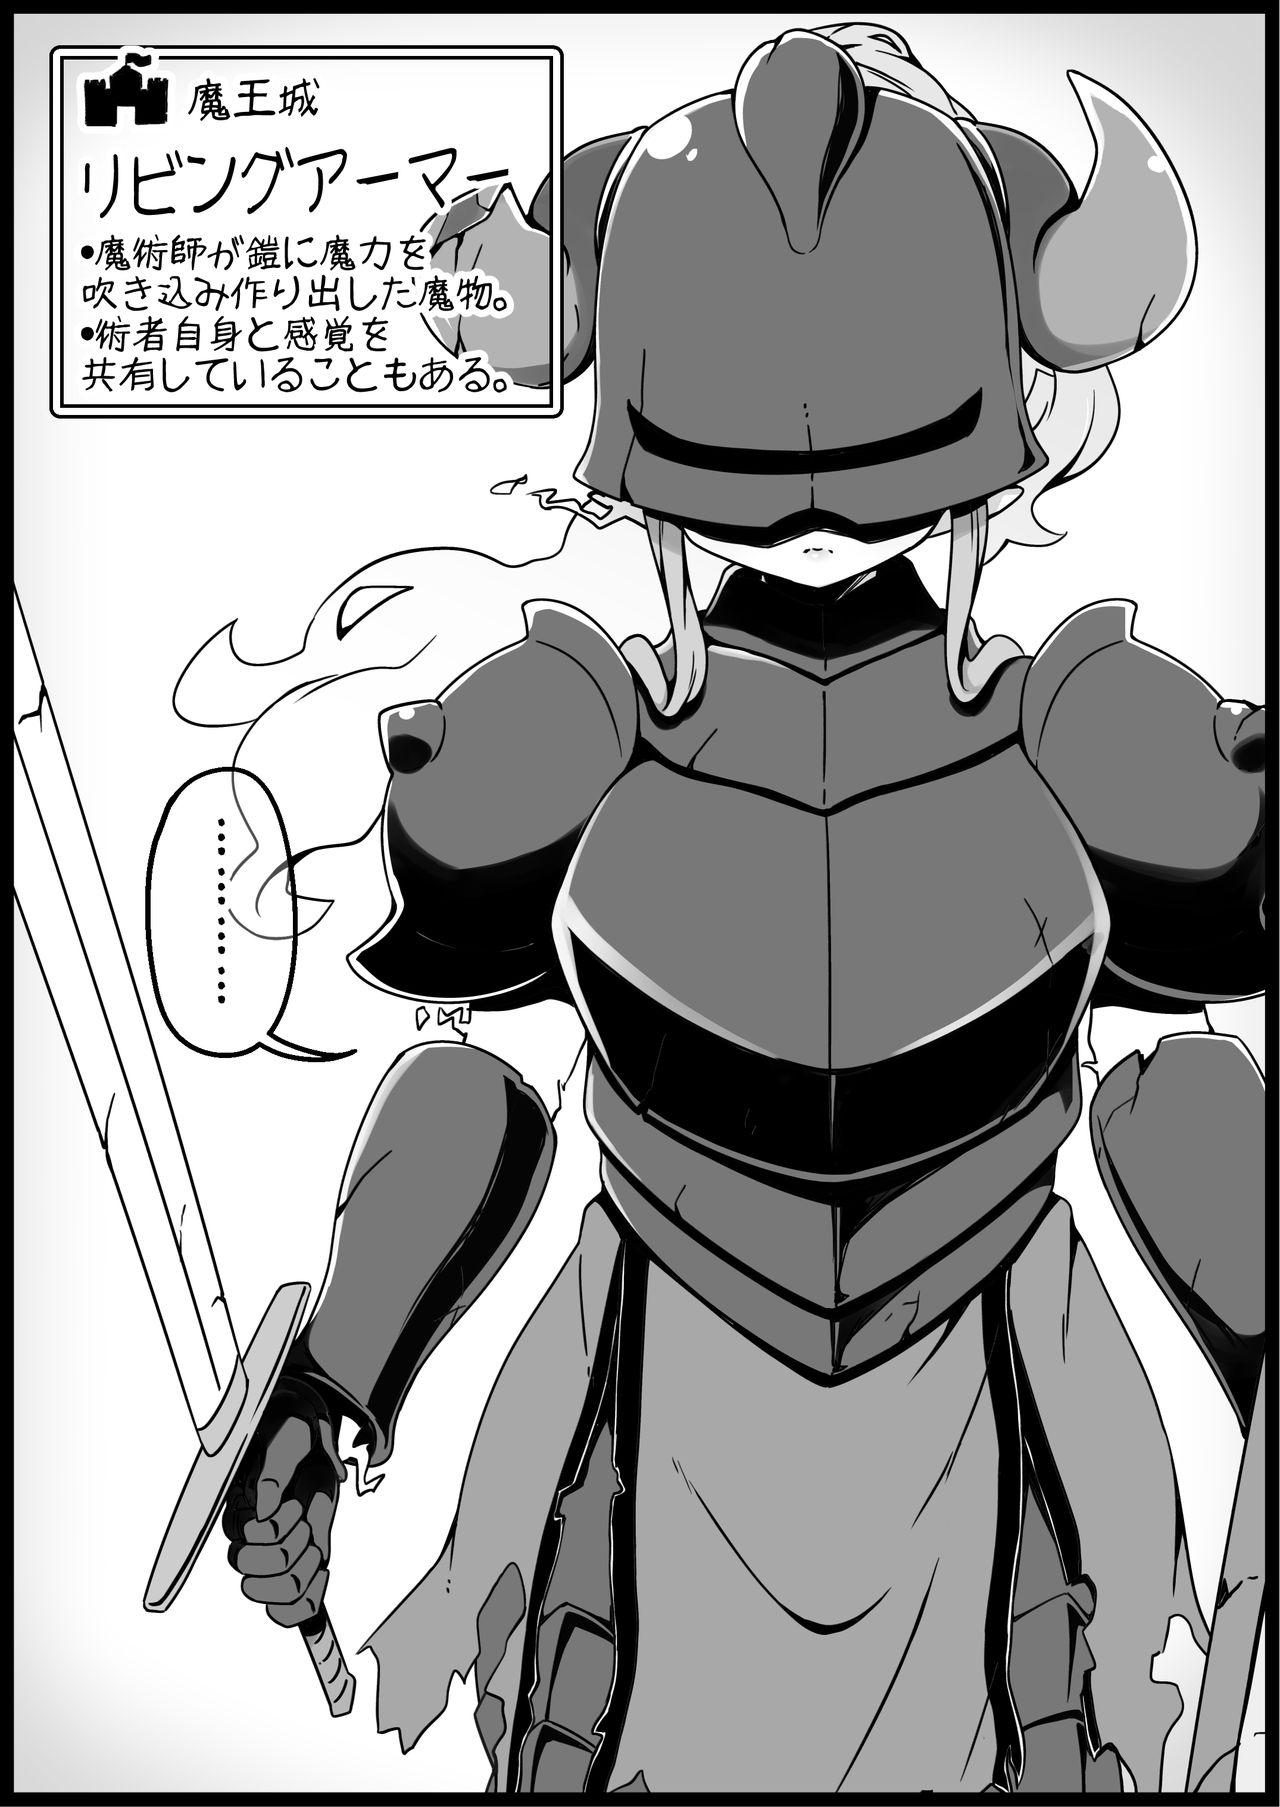 [Succubus Egg] Fantasy World 2 Too Forgiving to Heroes-Continued NPC (mob) Opponent-Centered Short H Manga Collection- 31